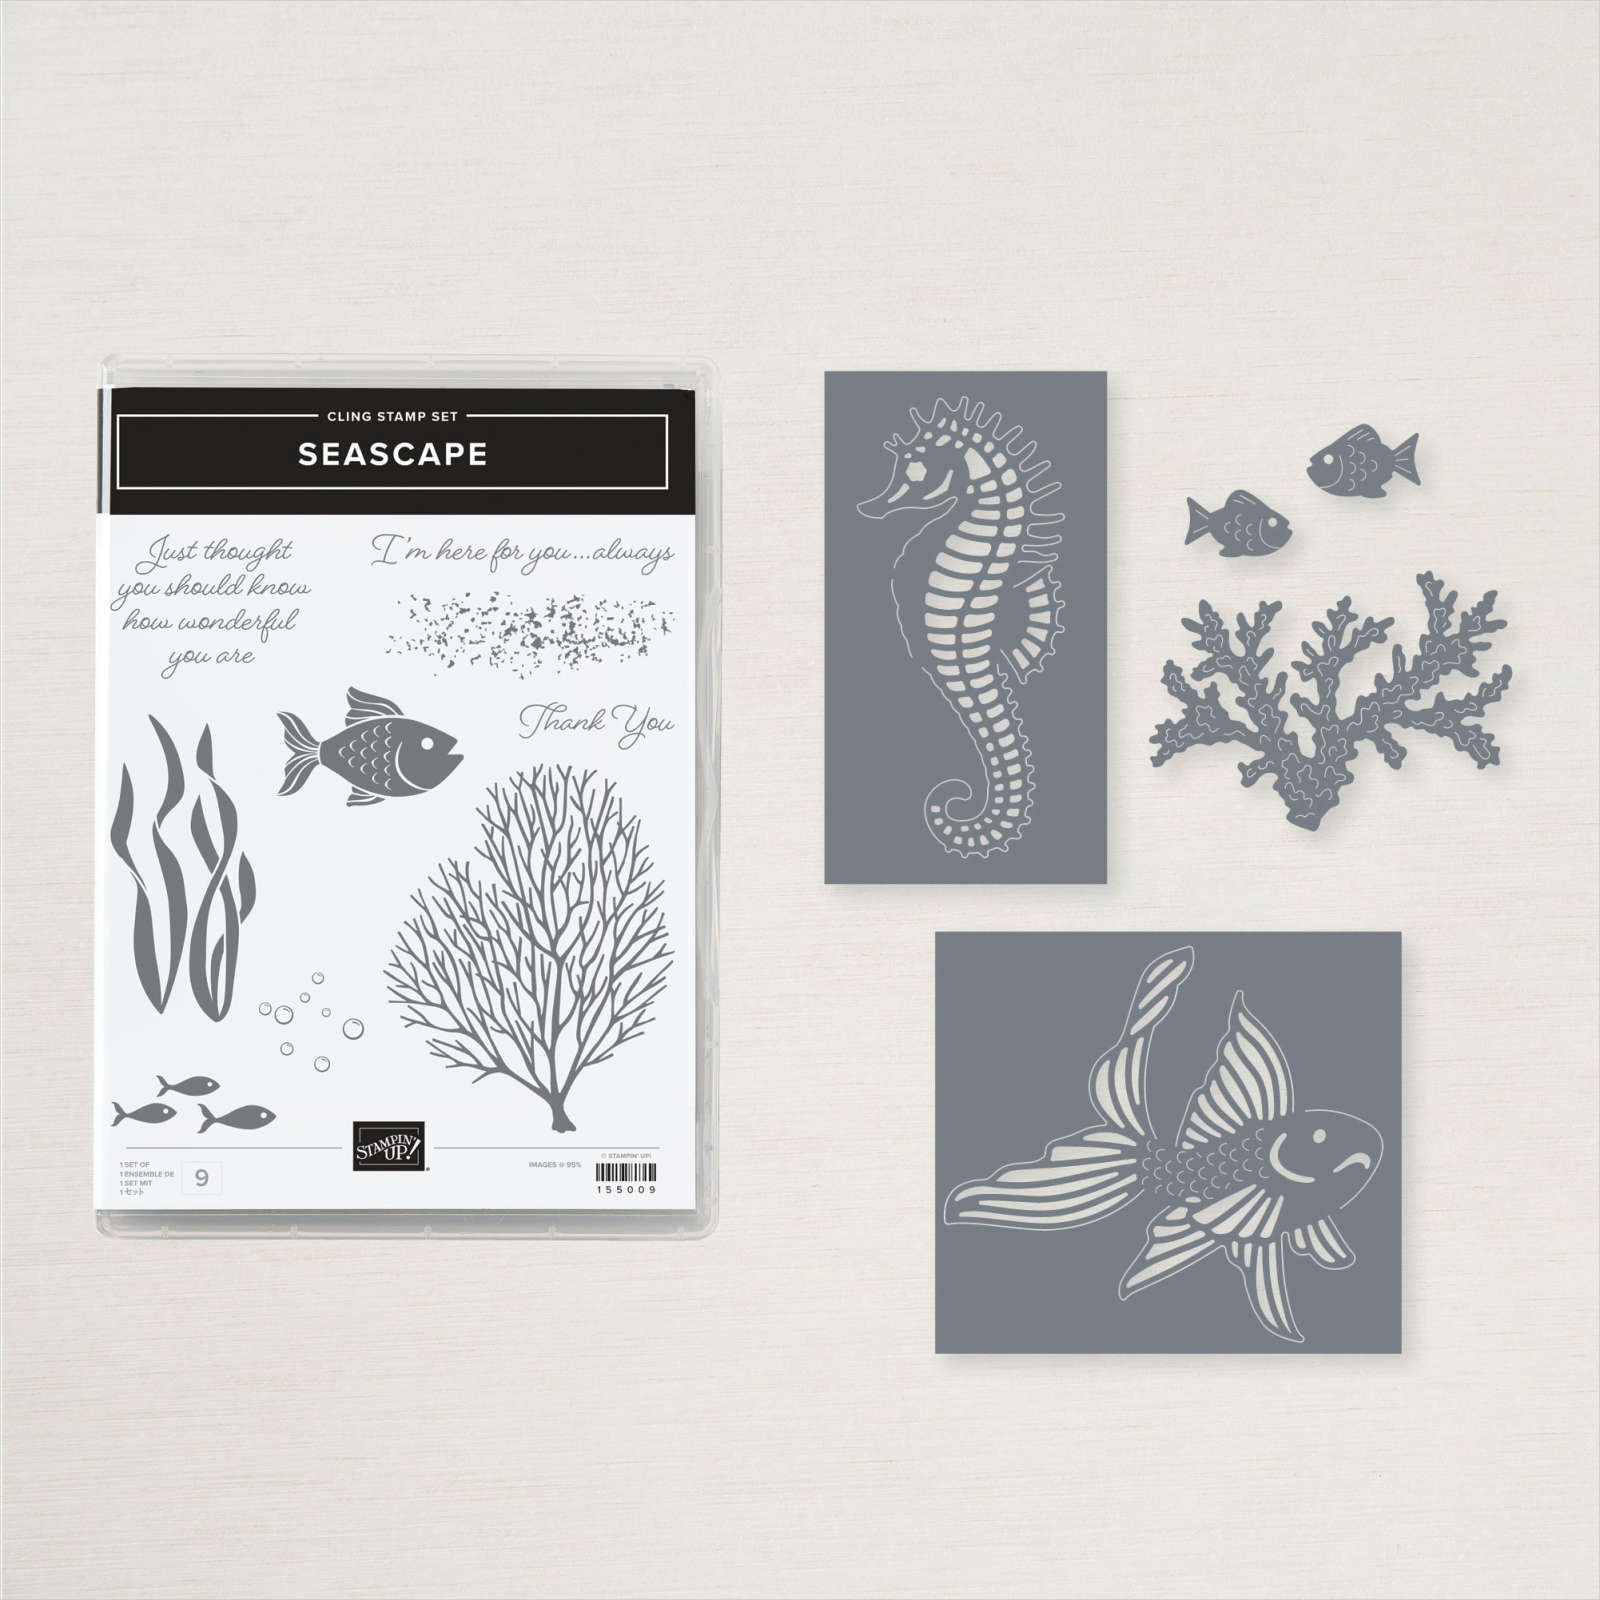 stampin up seascape stamp set and sea life dies for card making and craft